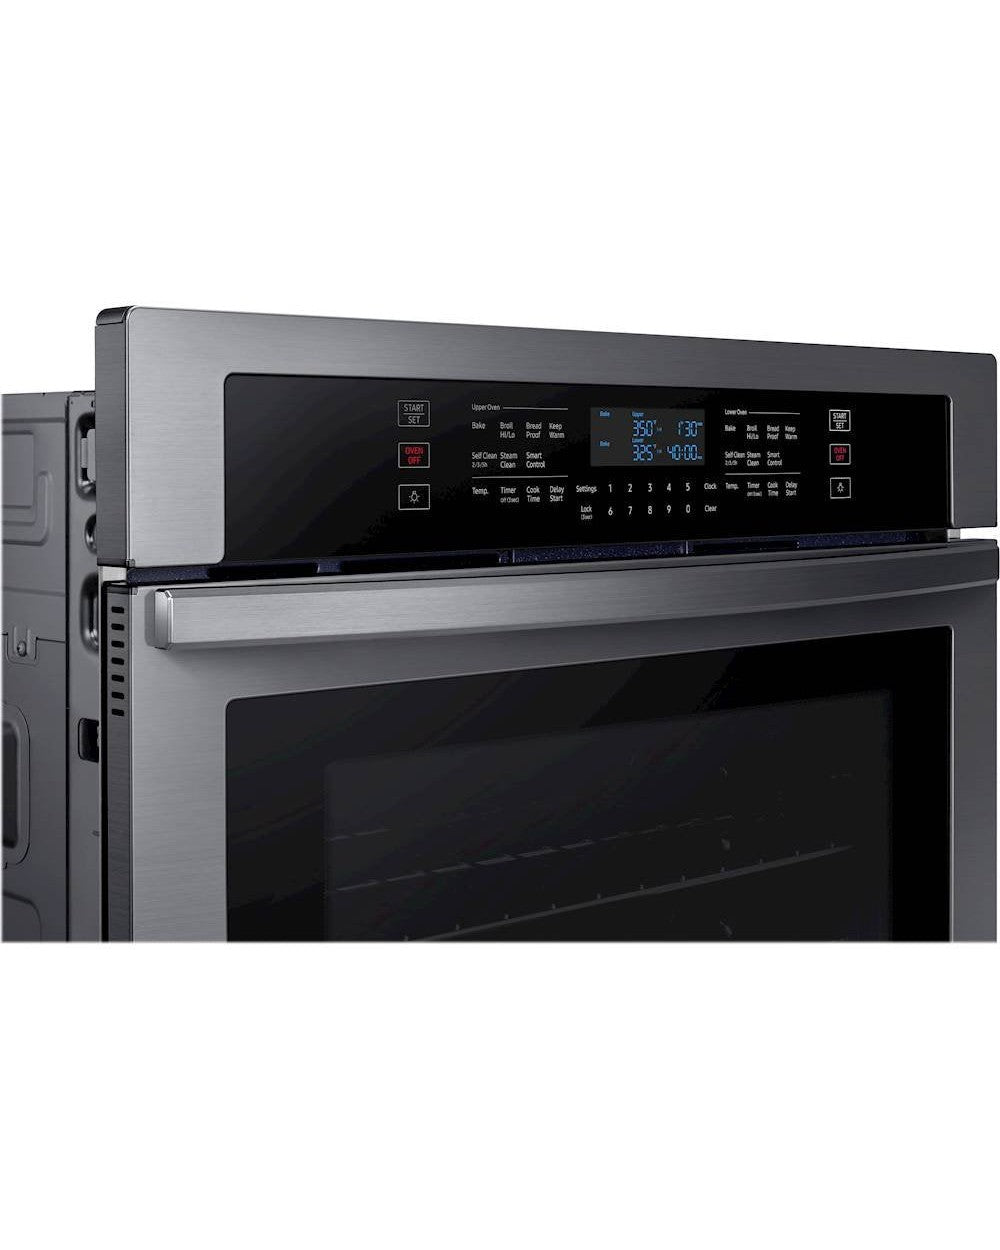 SAMSUNG NV51T5511DG/AA 30&quot; Smart Double Wall Oven in Black Stainless Steel